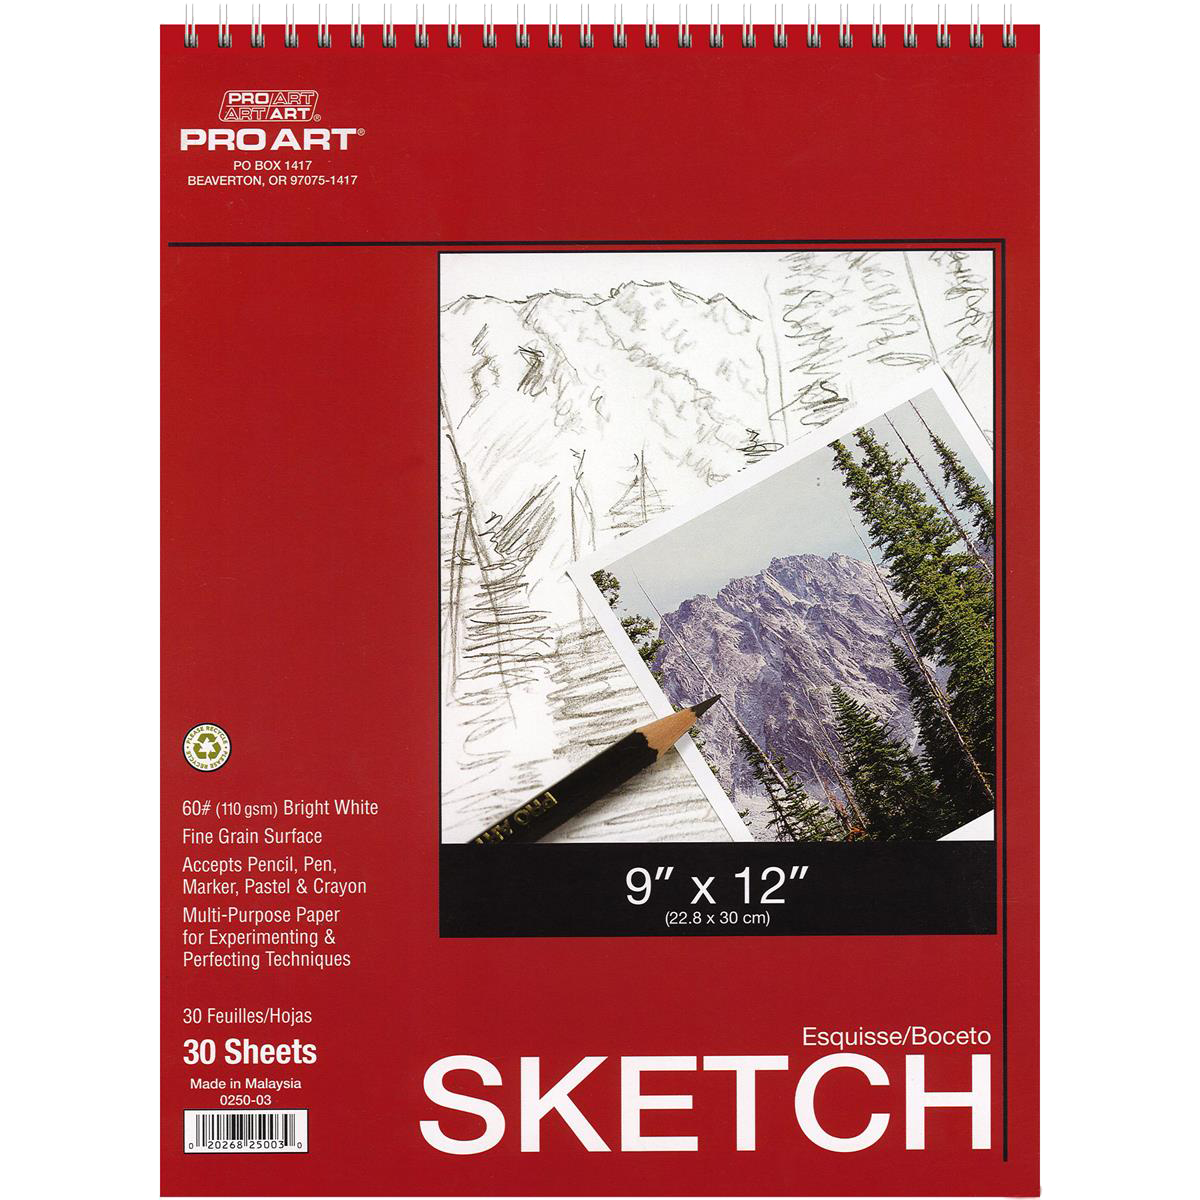 Sketchpads Journals Zembo Temple Of Skate And Design